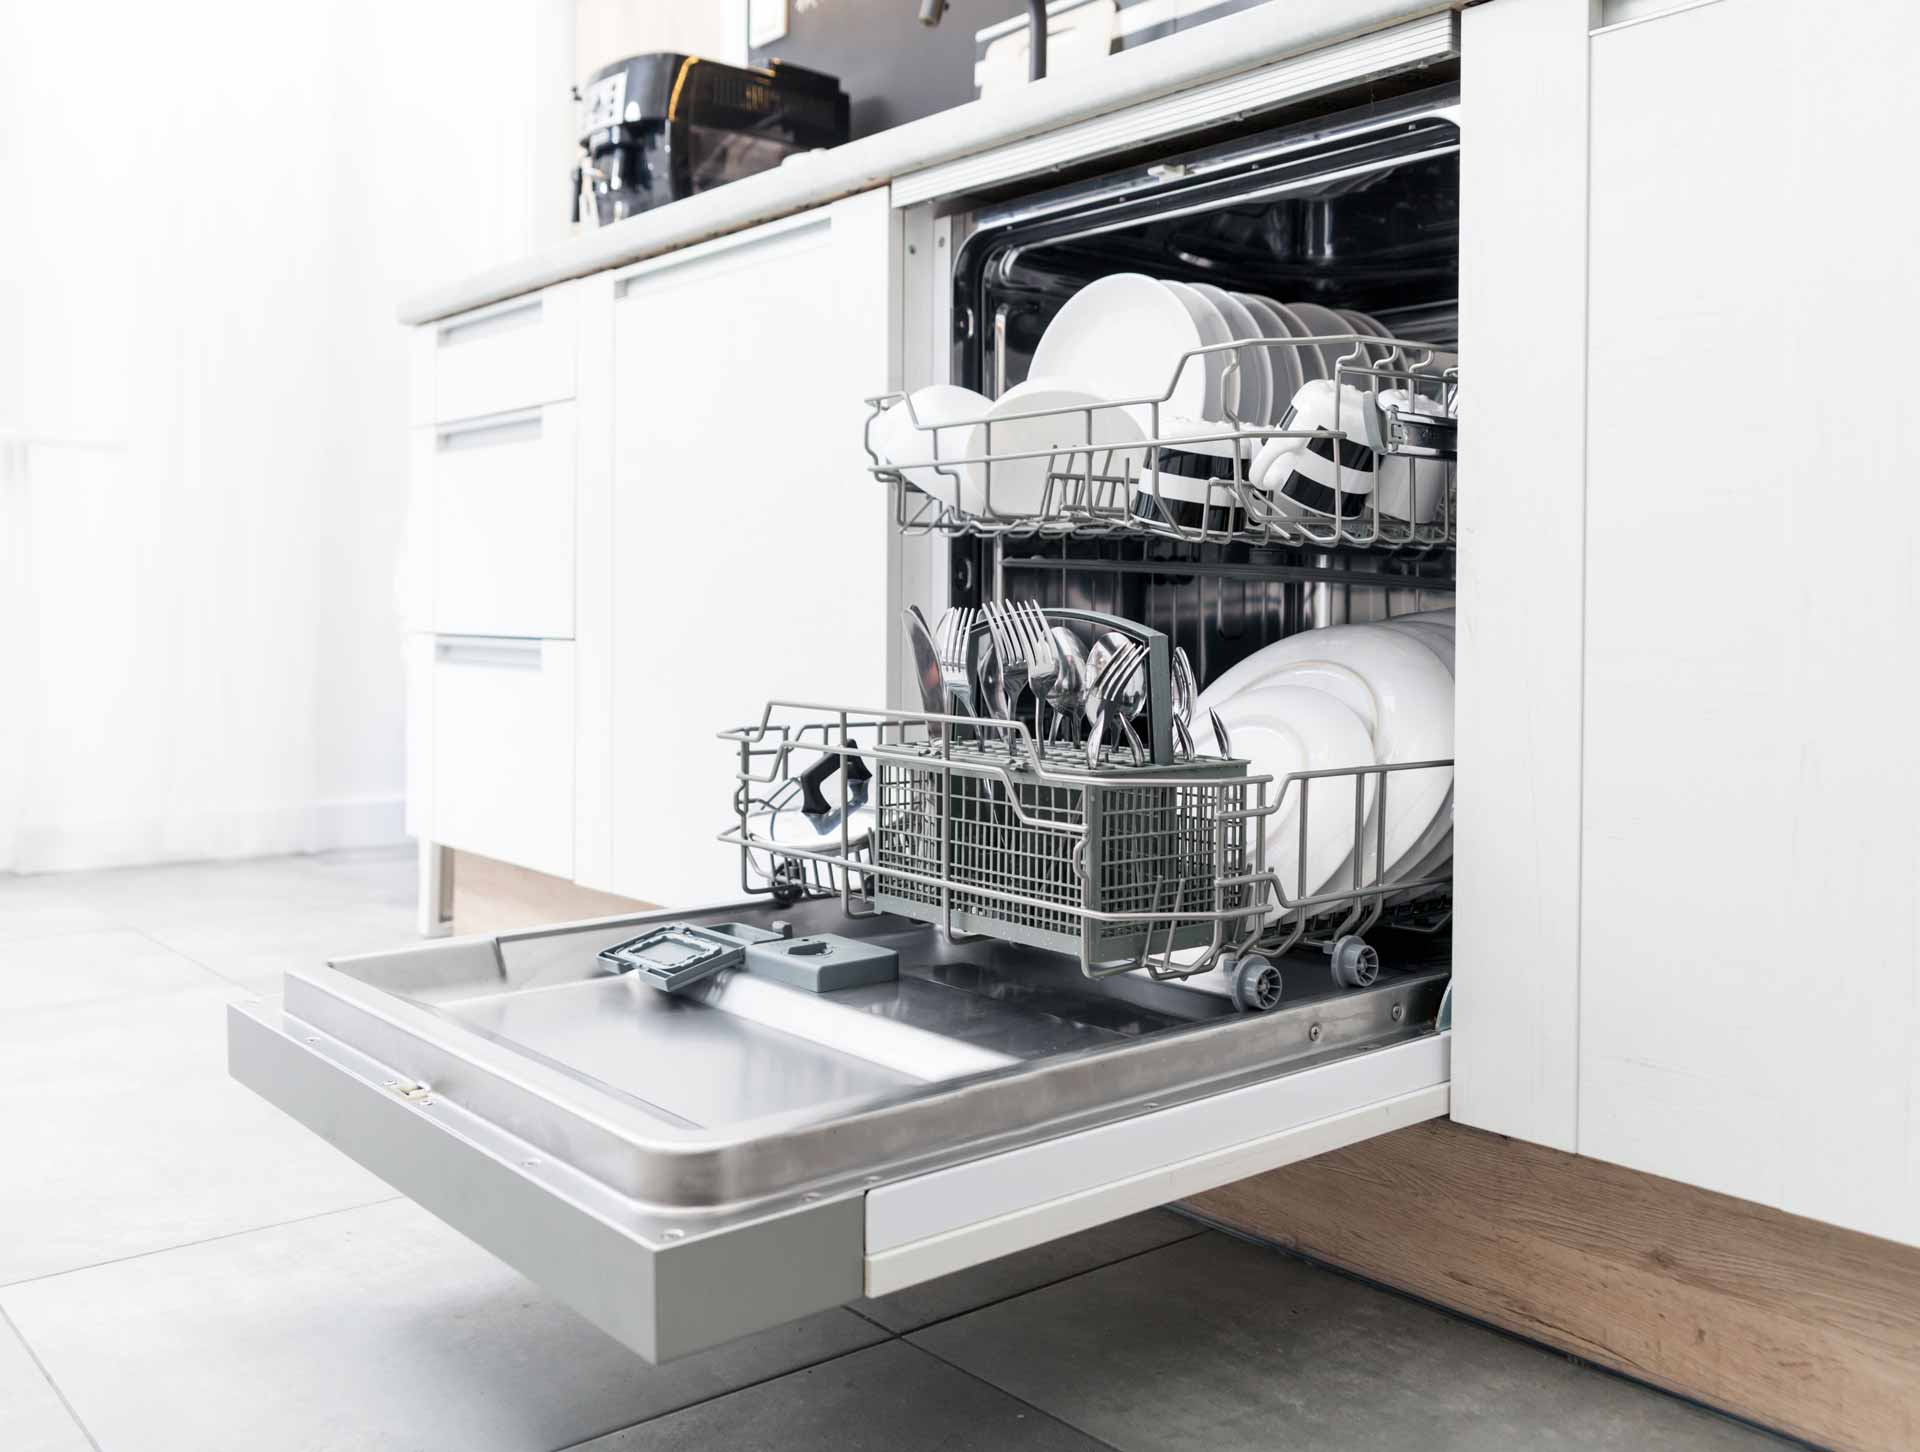 Dishwasher full of clean dishes